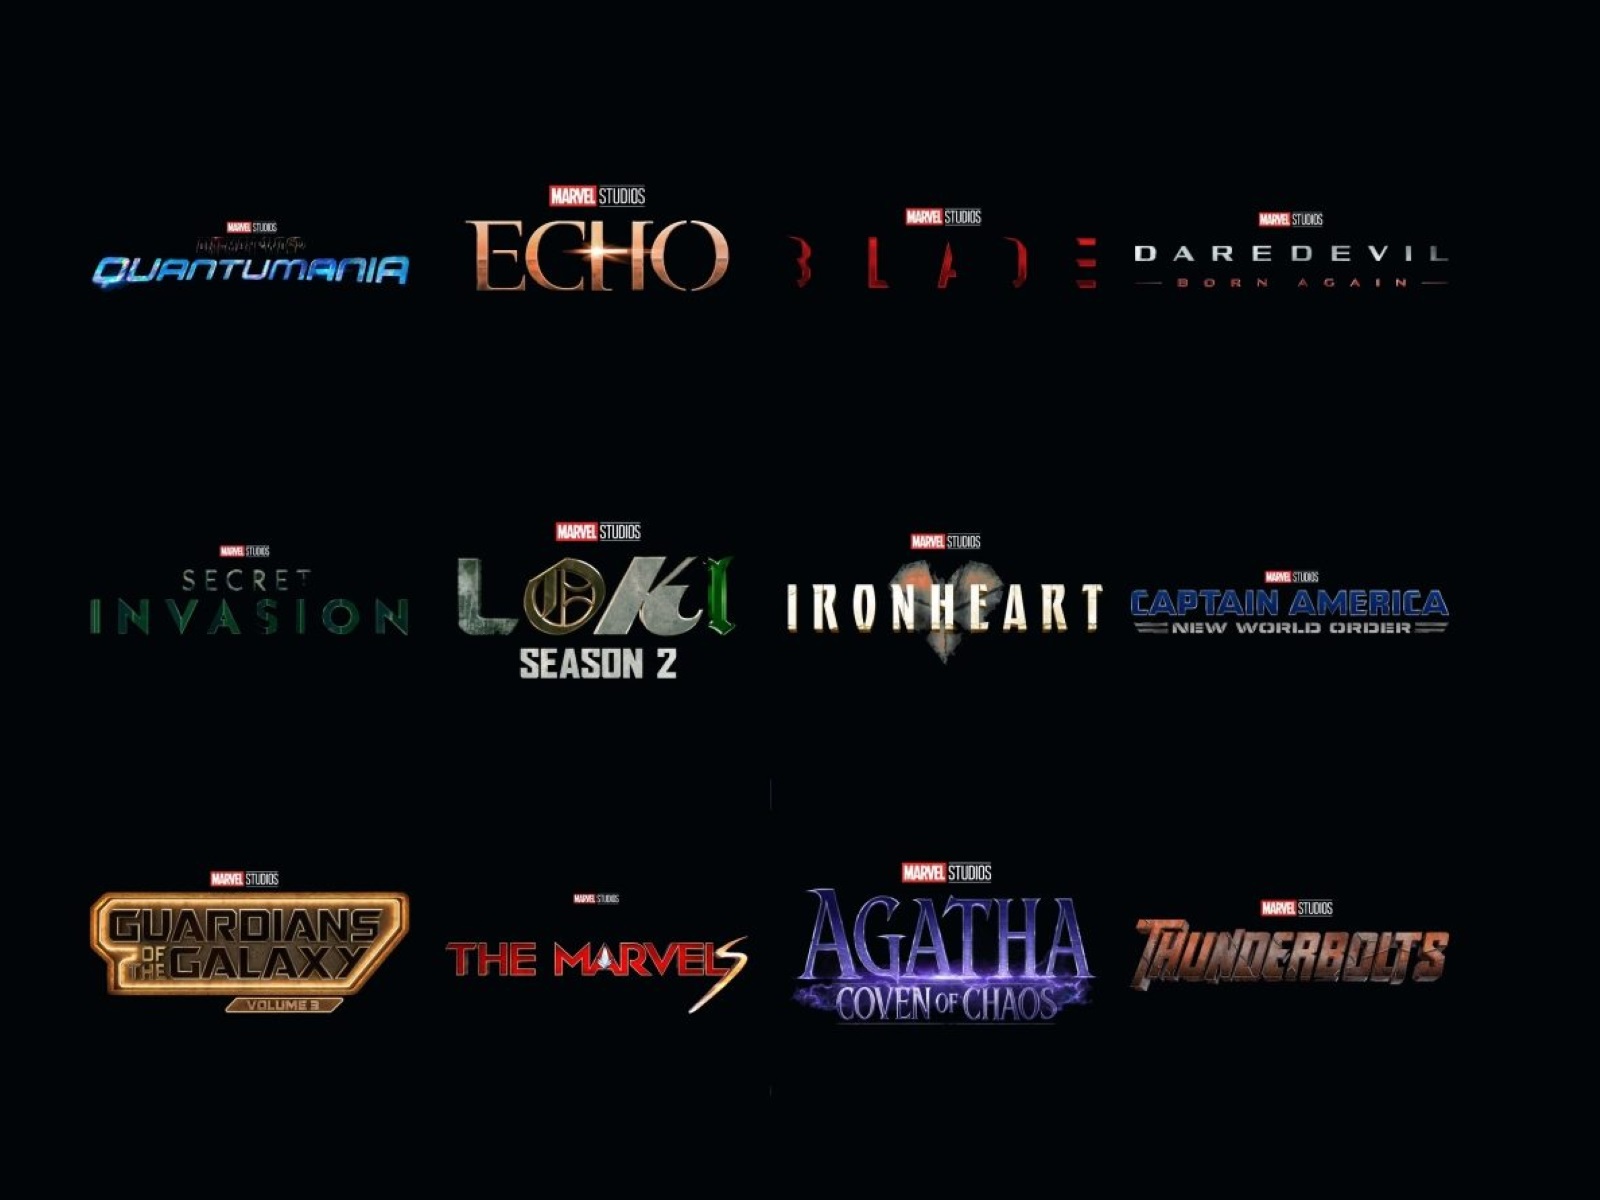 How To Watch The Marvel Movies And Shows In Order